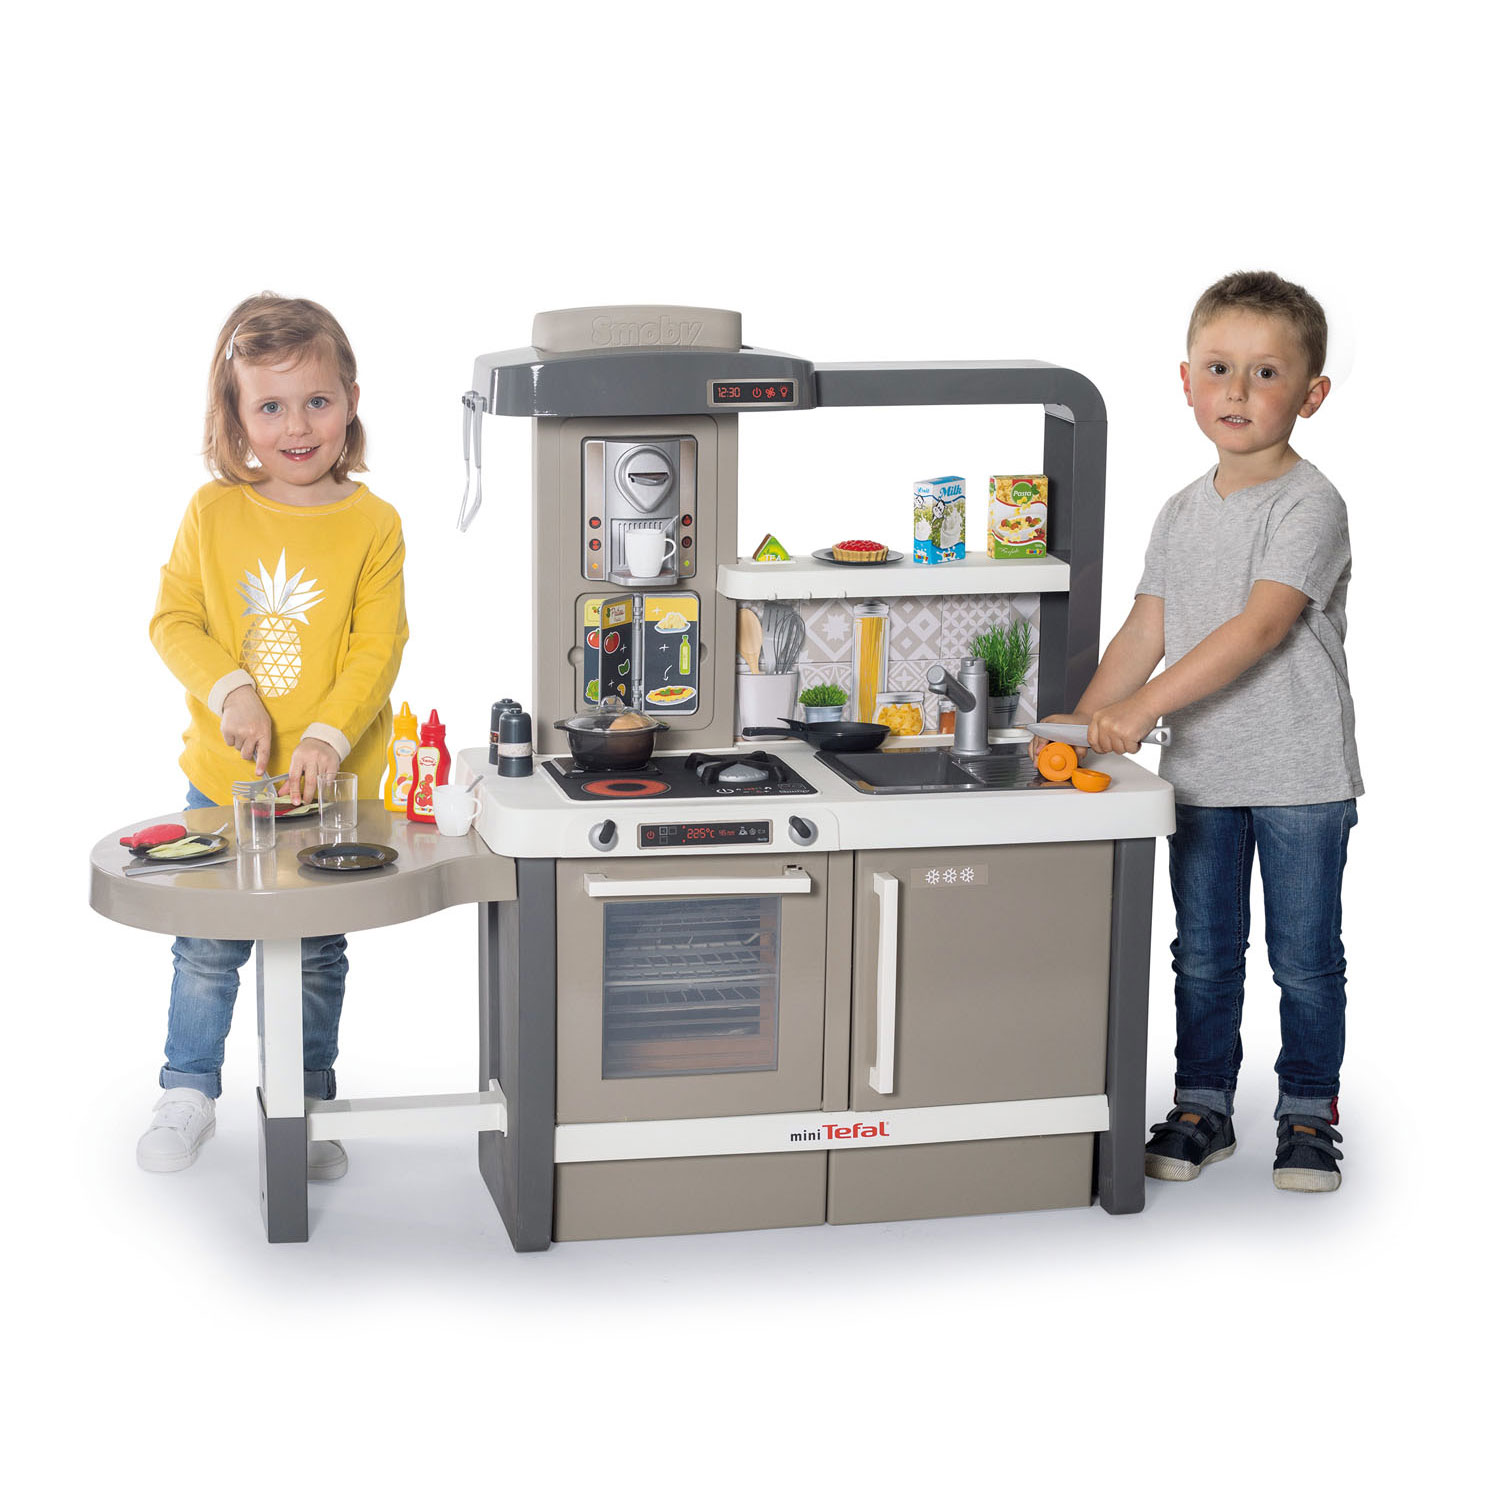 Tussendoortje Messing spek Smoby Tefal Evolutionary Kitchen | Thimble Toys